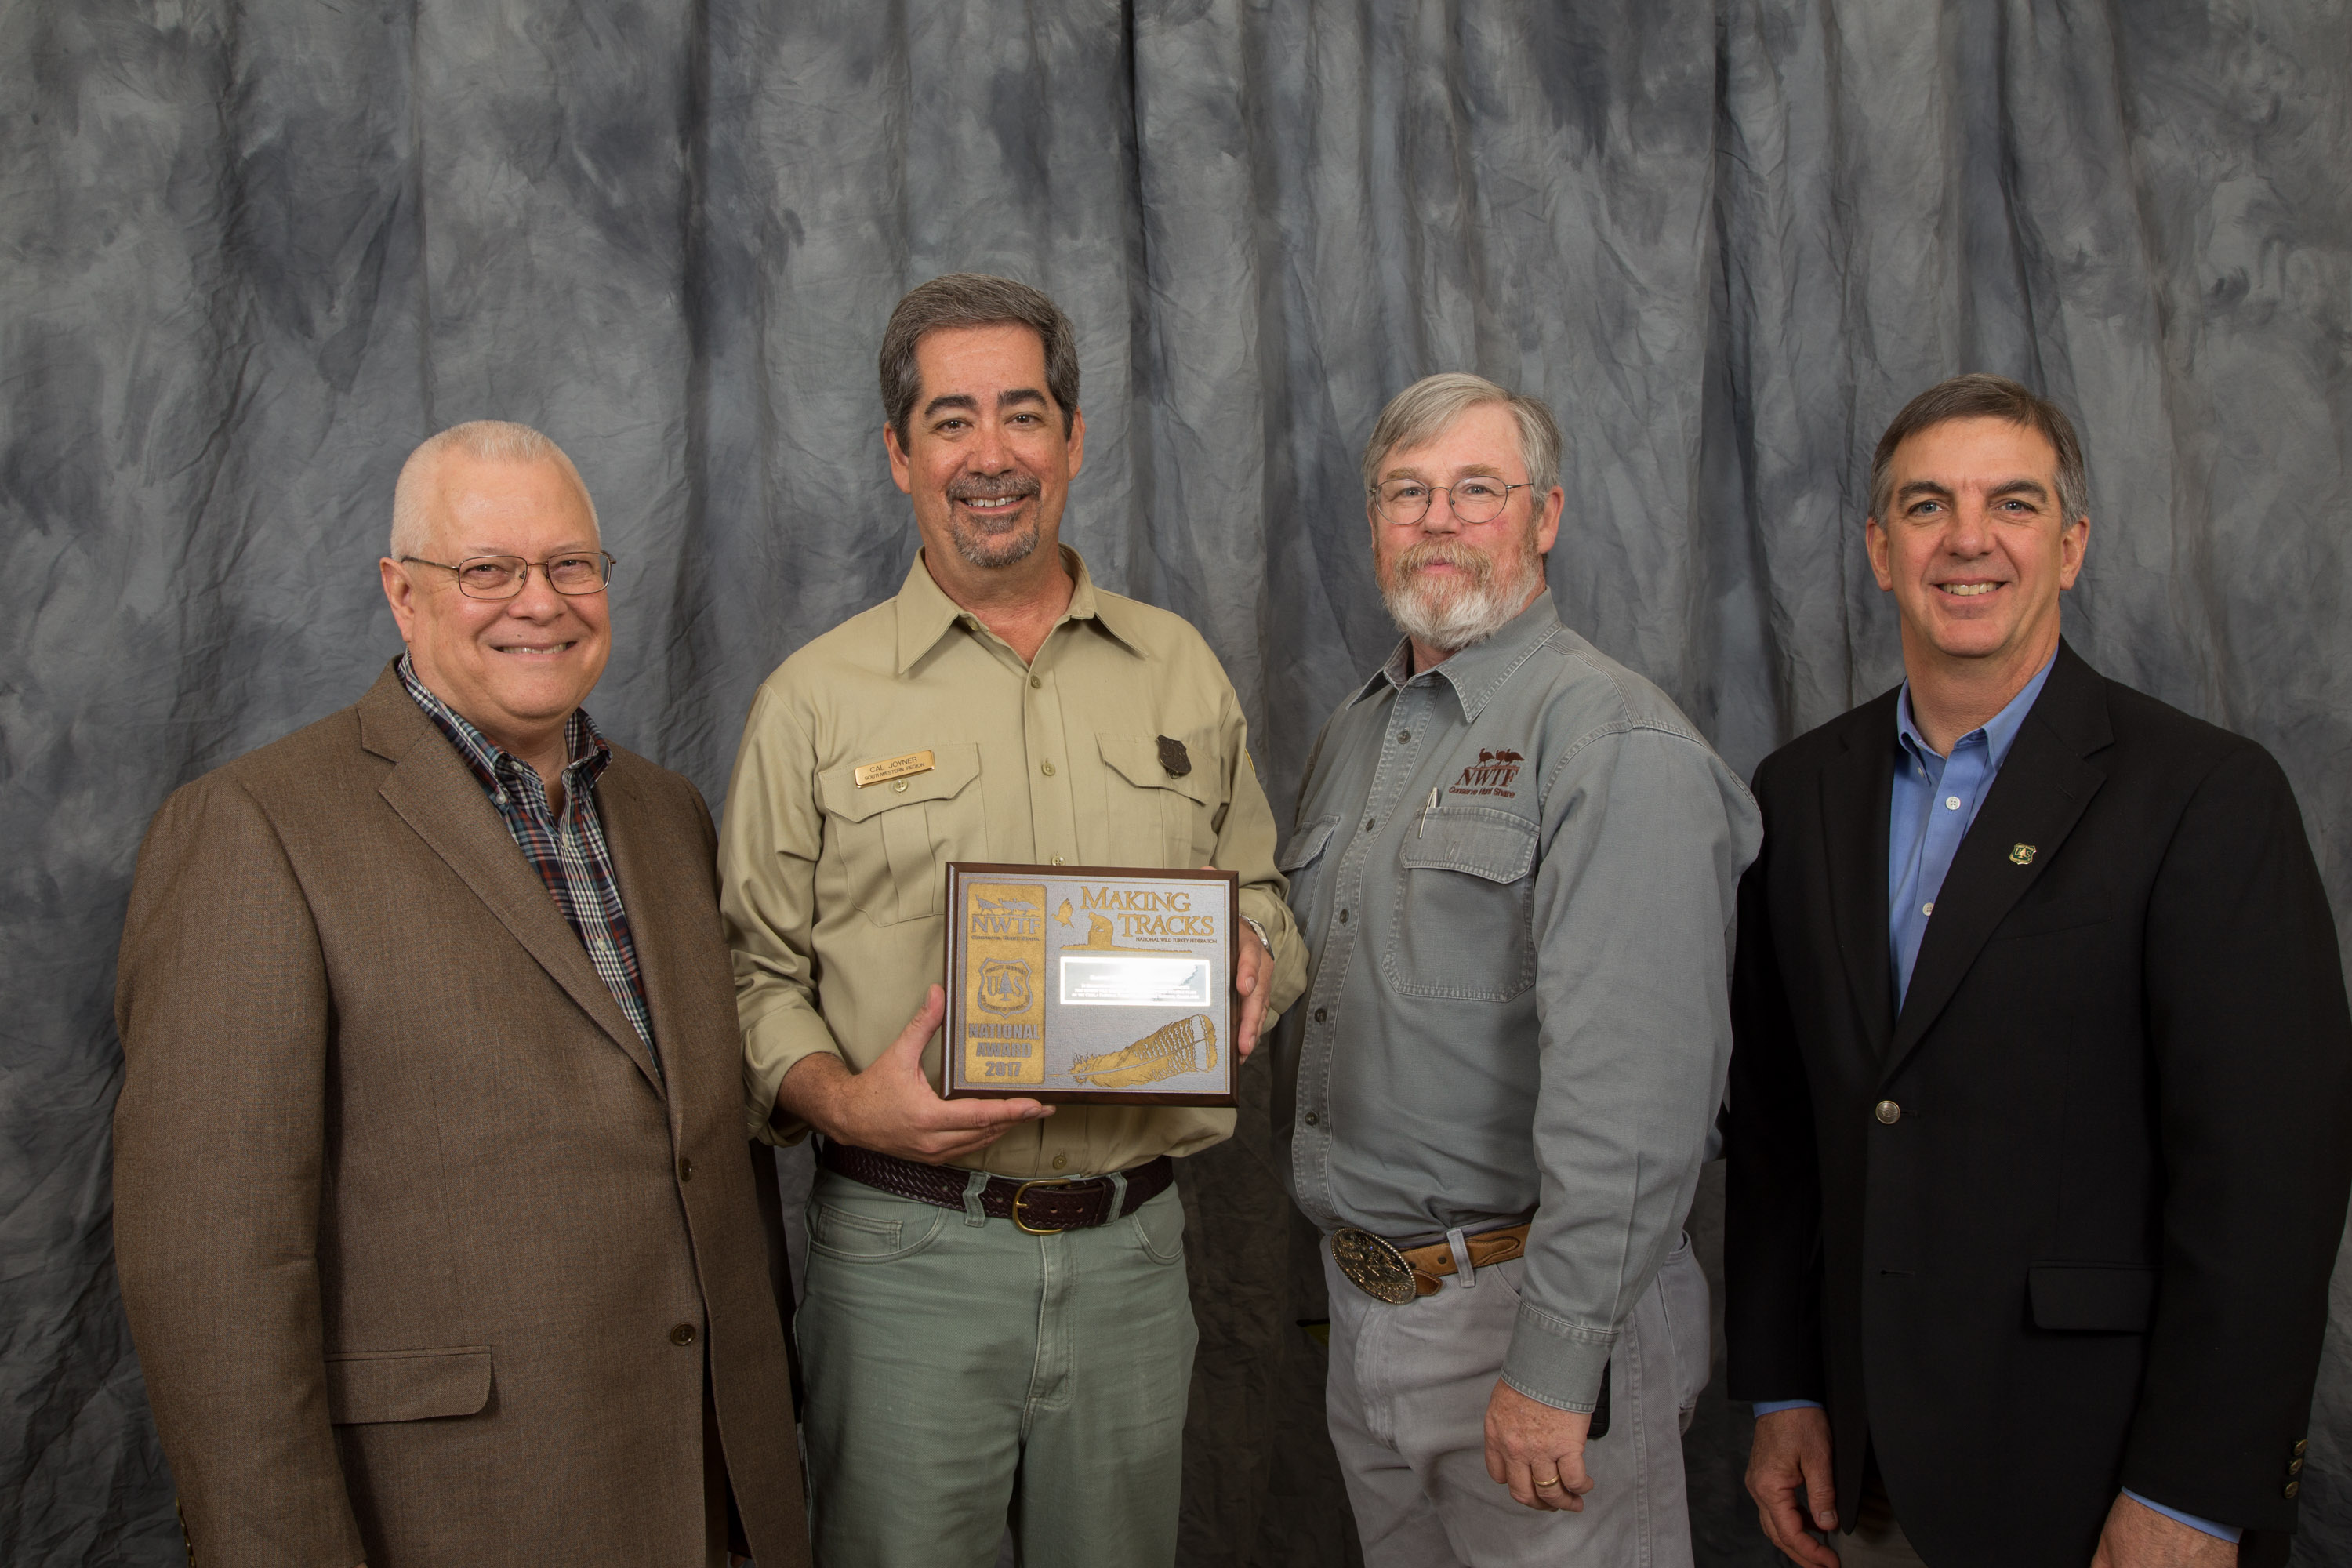 Photograph of Southwestern Regional Forester, Cal Joyner accepting the award for Ian Fox.  To left is NWTF's Gene Miller; to right is NWTFs Scott Lerich, and Making Tracks Steering Committee Member/Regional Wildlife Program Leader, Brian Dykstra. 